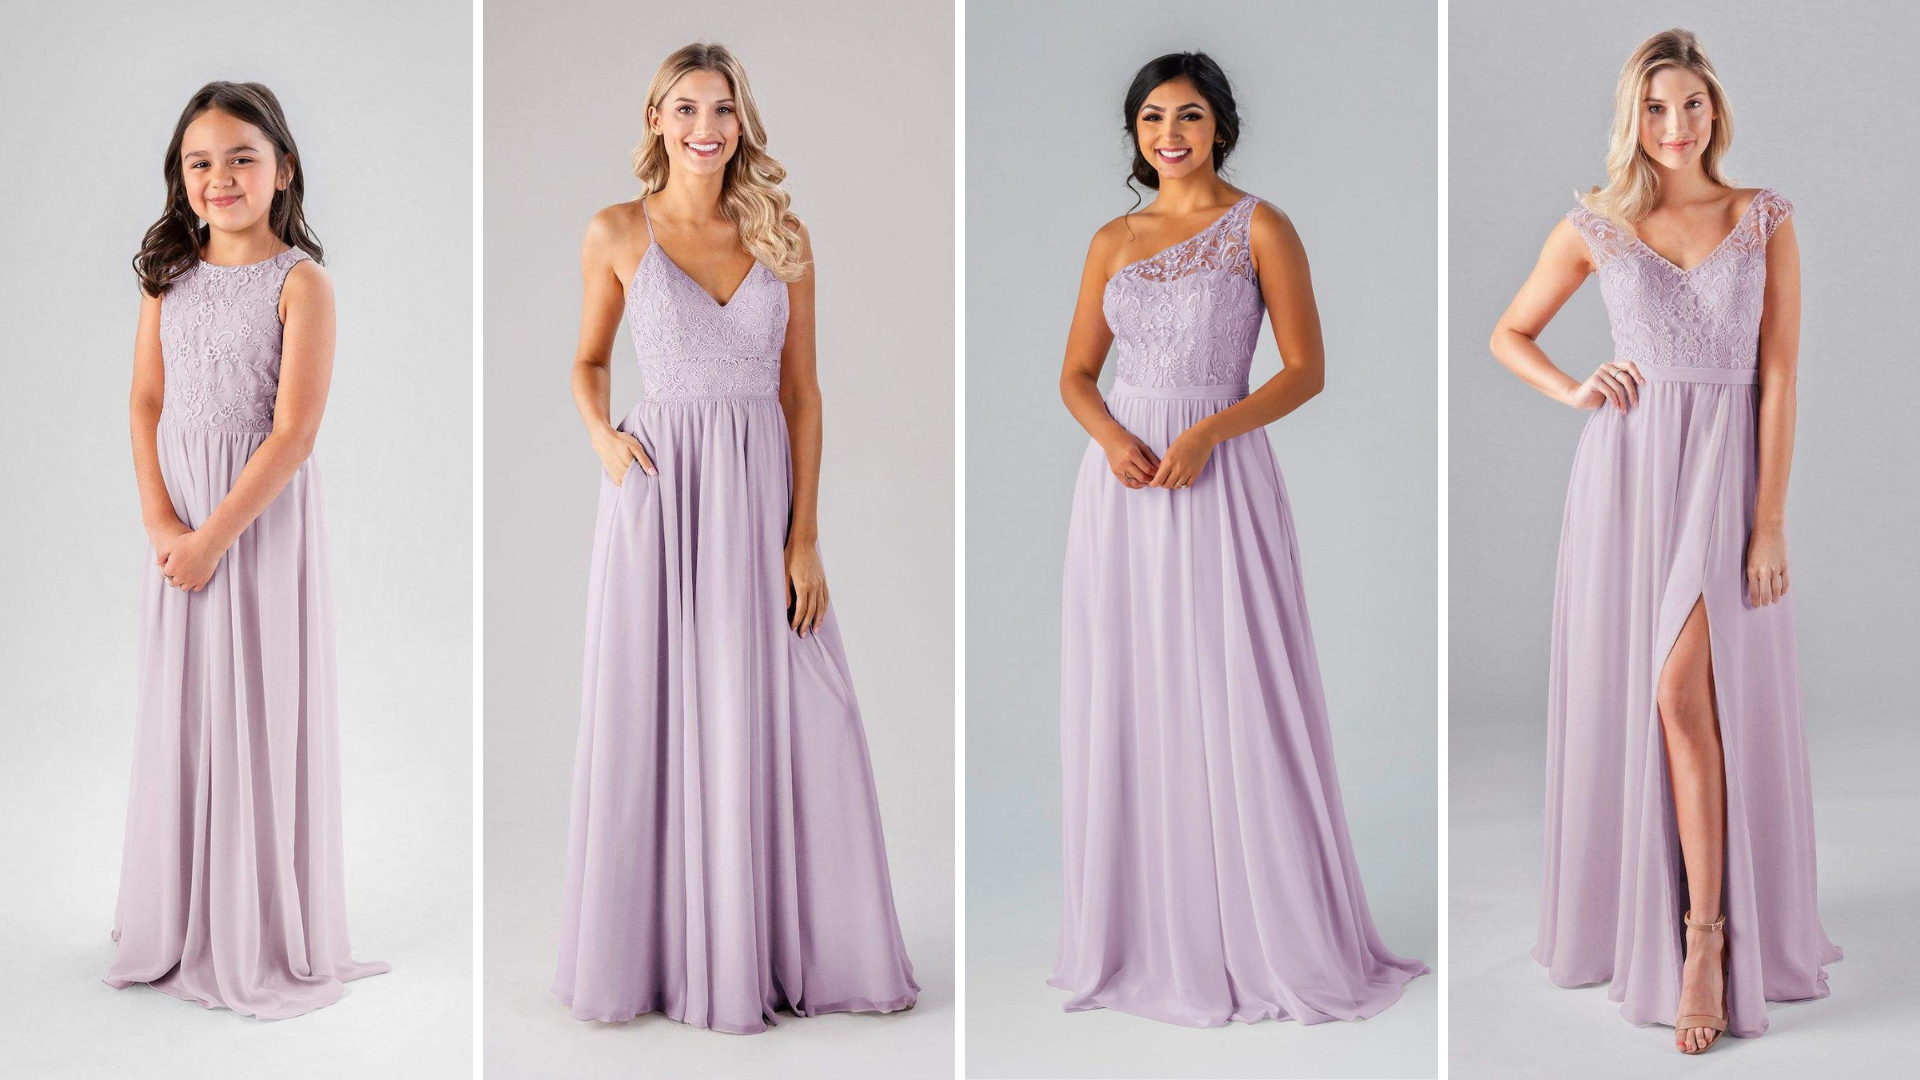 Models wearing Kennedy Blue Embroidered Bridesmaid Dresses in styles "Cameron", "Sutton", and "Morgan"